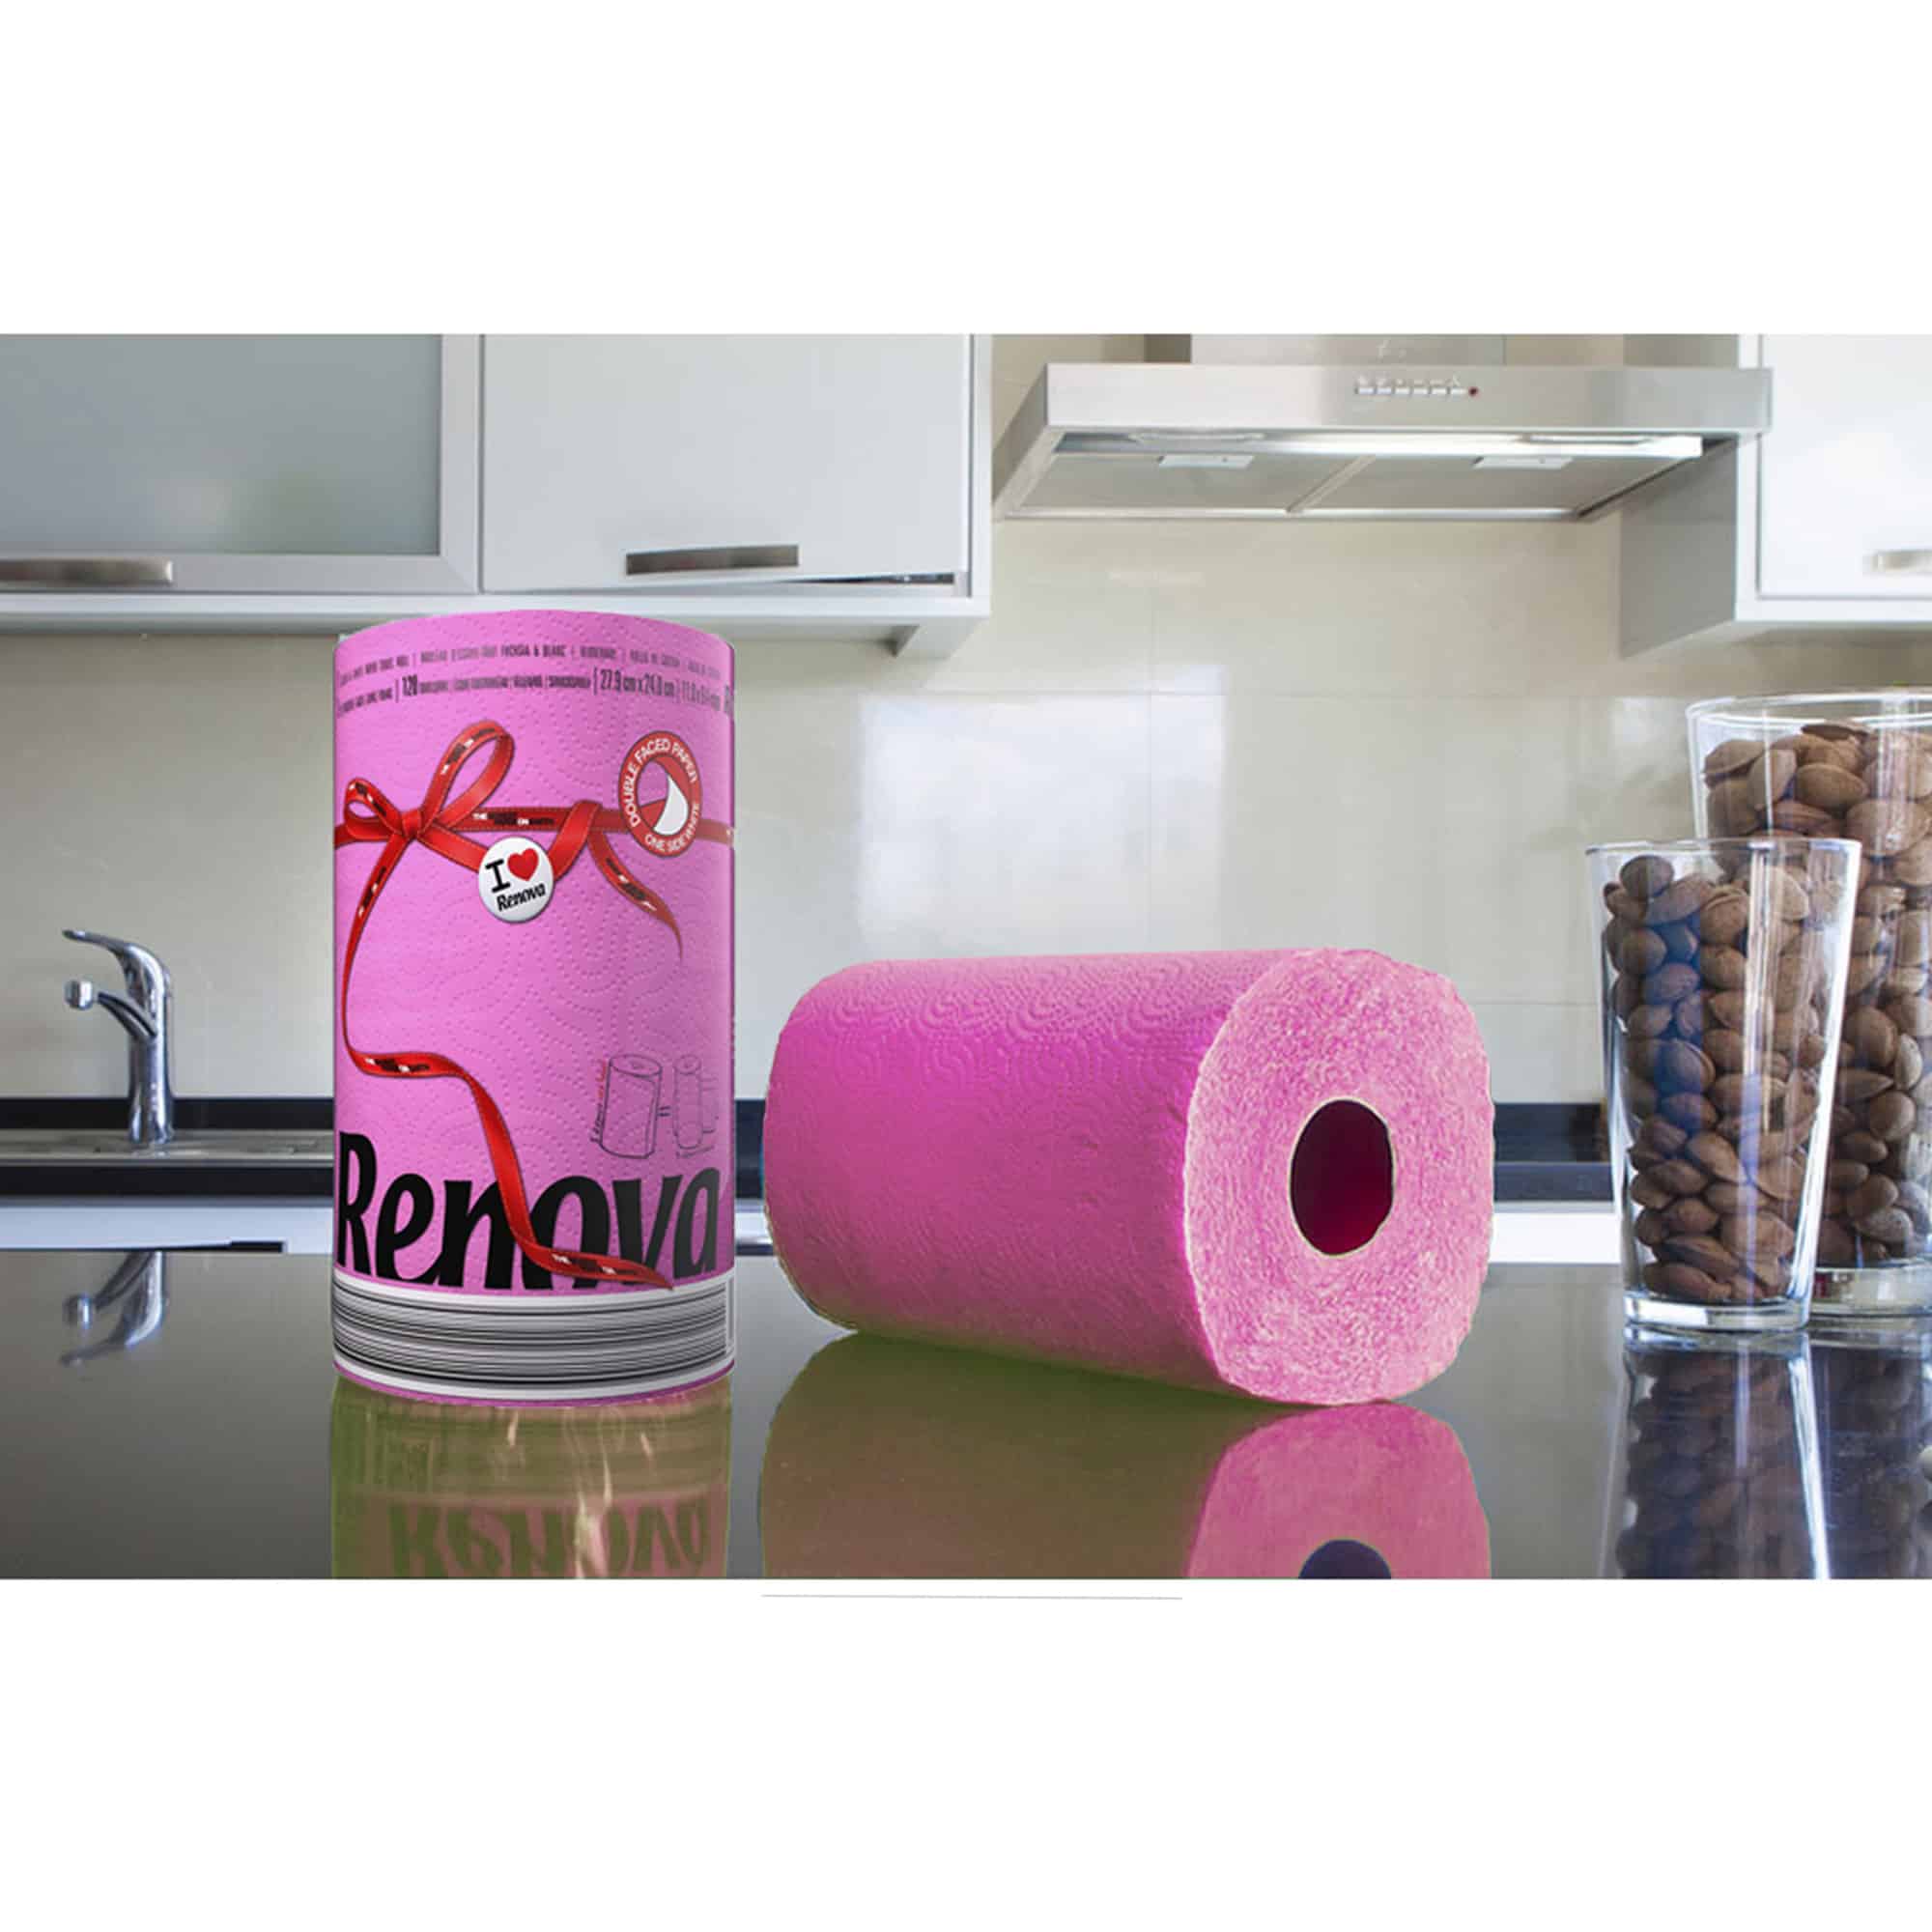  HEALLILY 3 Packs Colored Paper Towels Tissue Wrapping